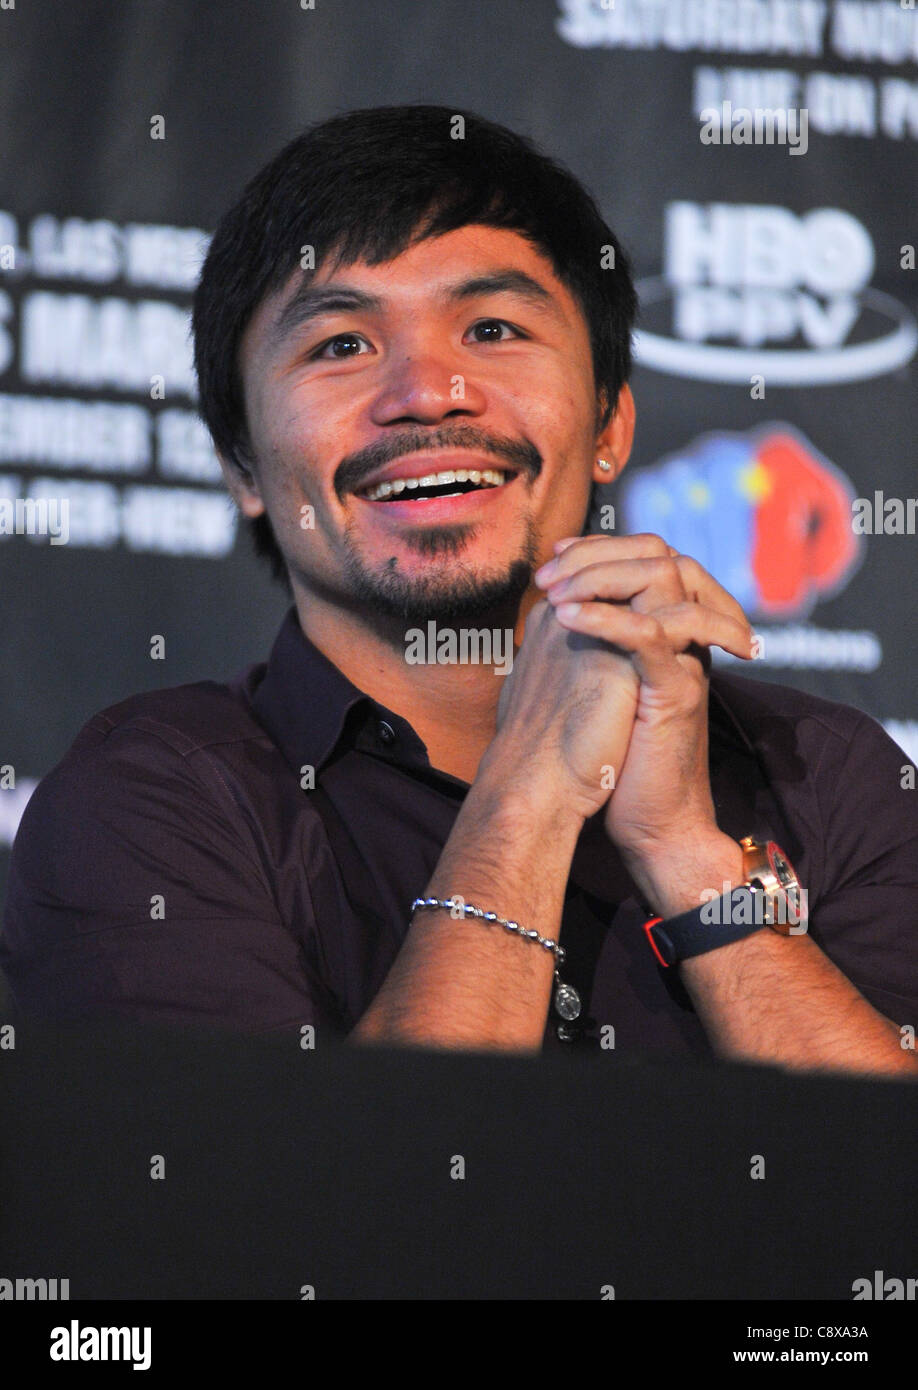 Manny Pacquiao public appearance Manny Pacquiao Juan Manuel Marquez News Conference LuncheonLighthouse Chelsea Piers